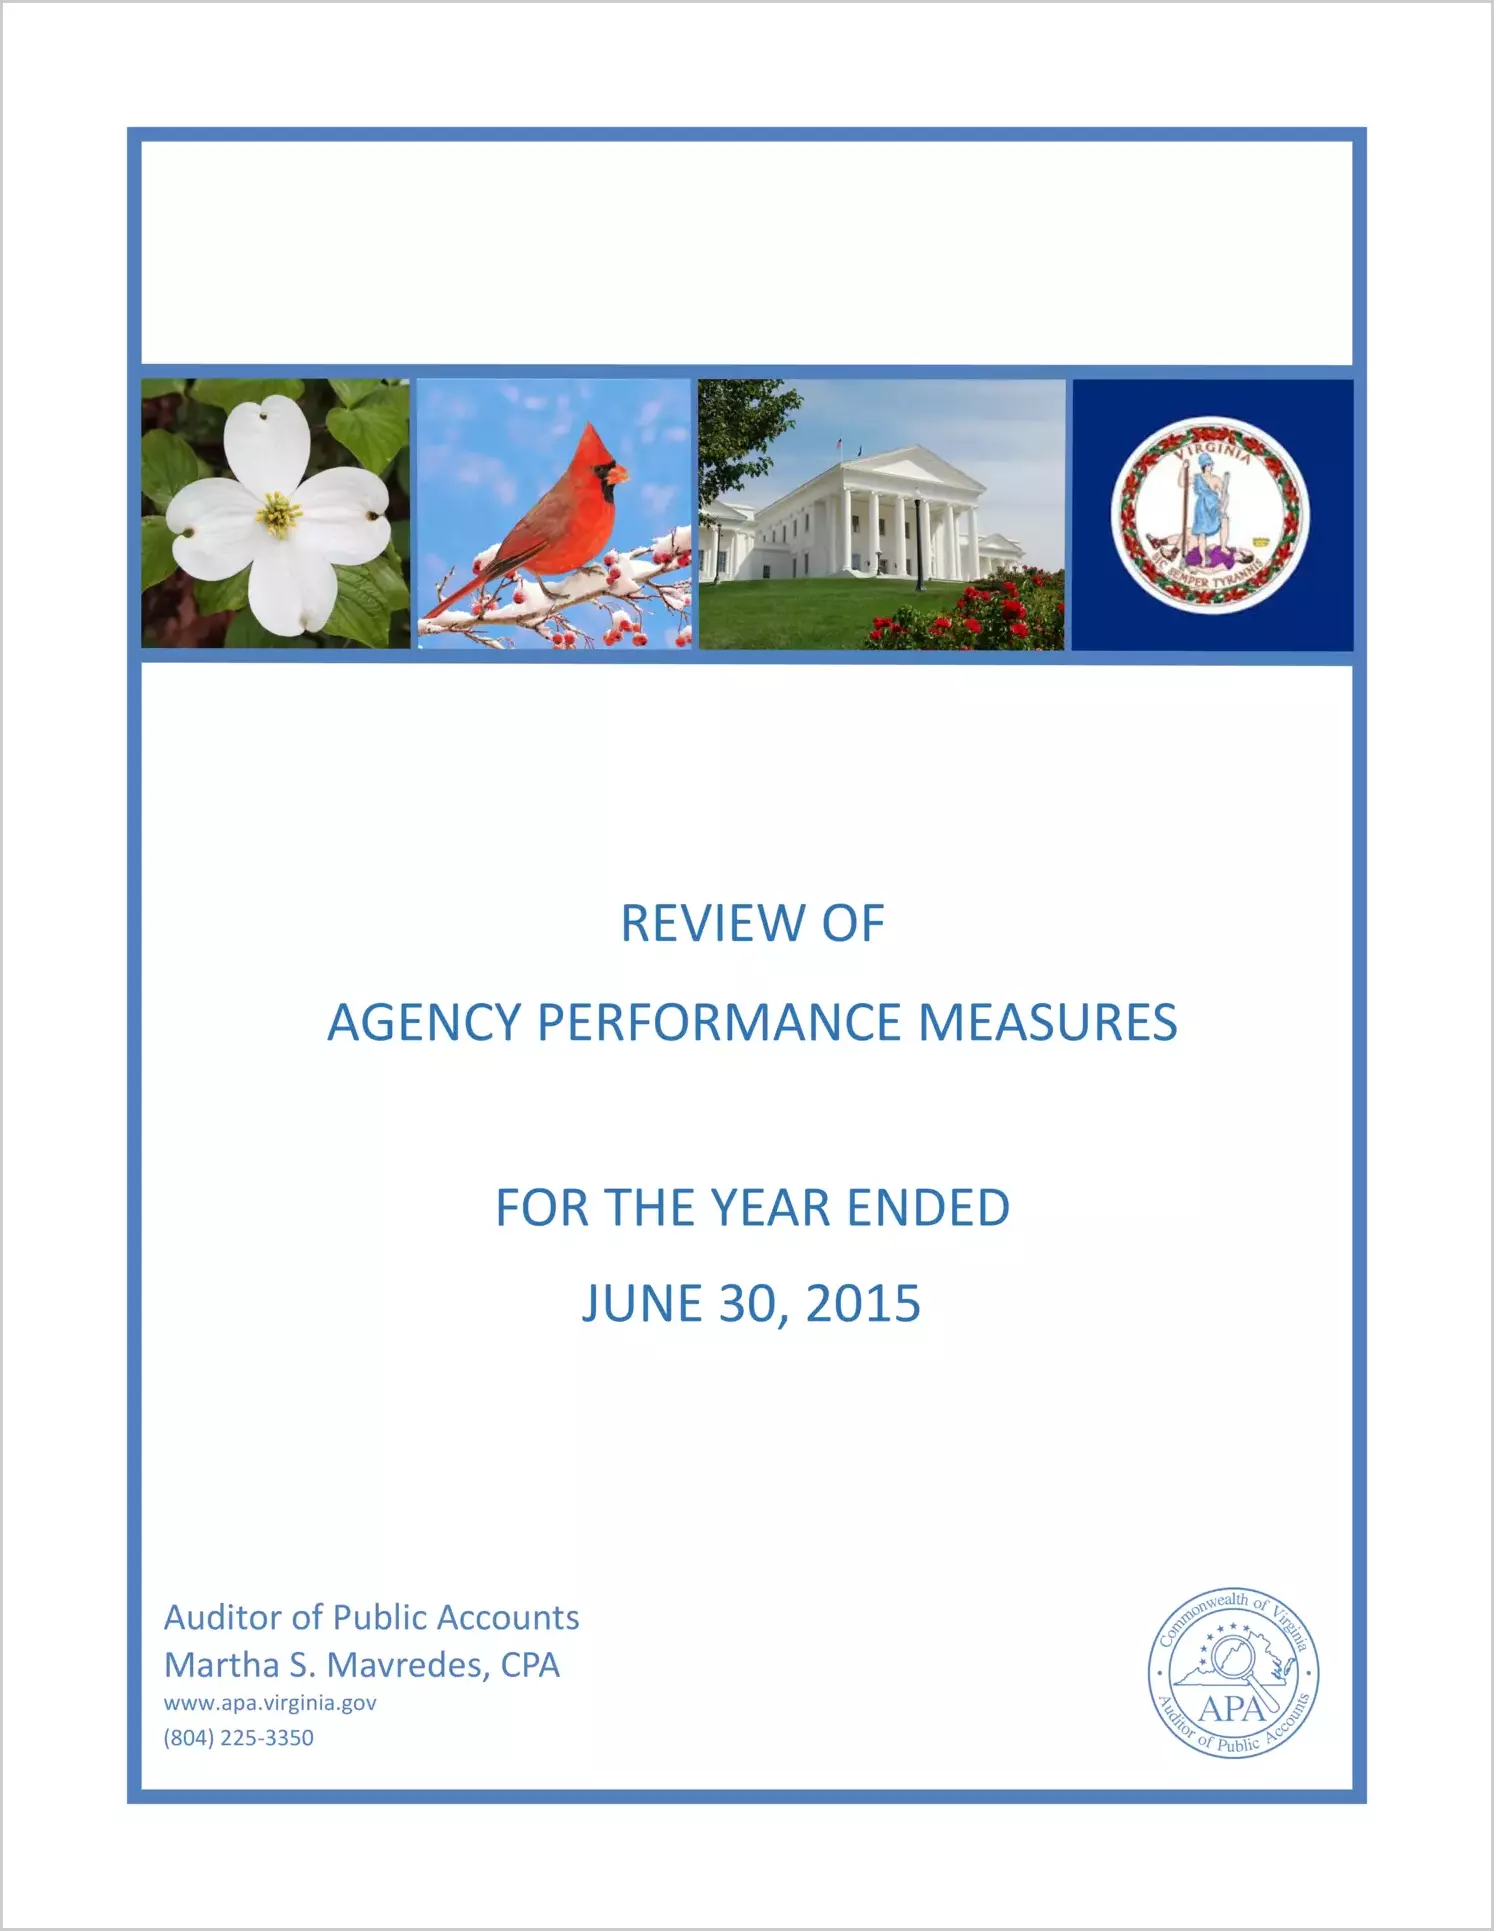 Review of Agency Performance Measures for the year ended June 30, 2015